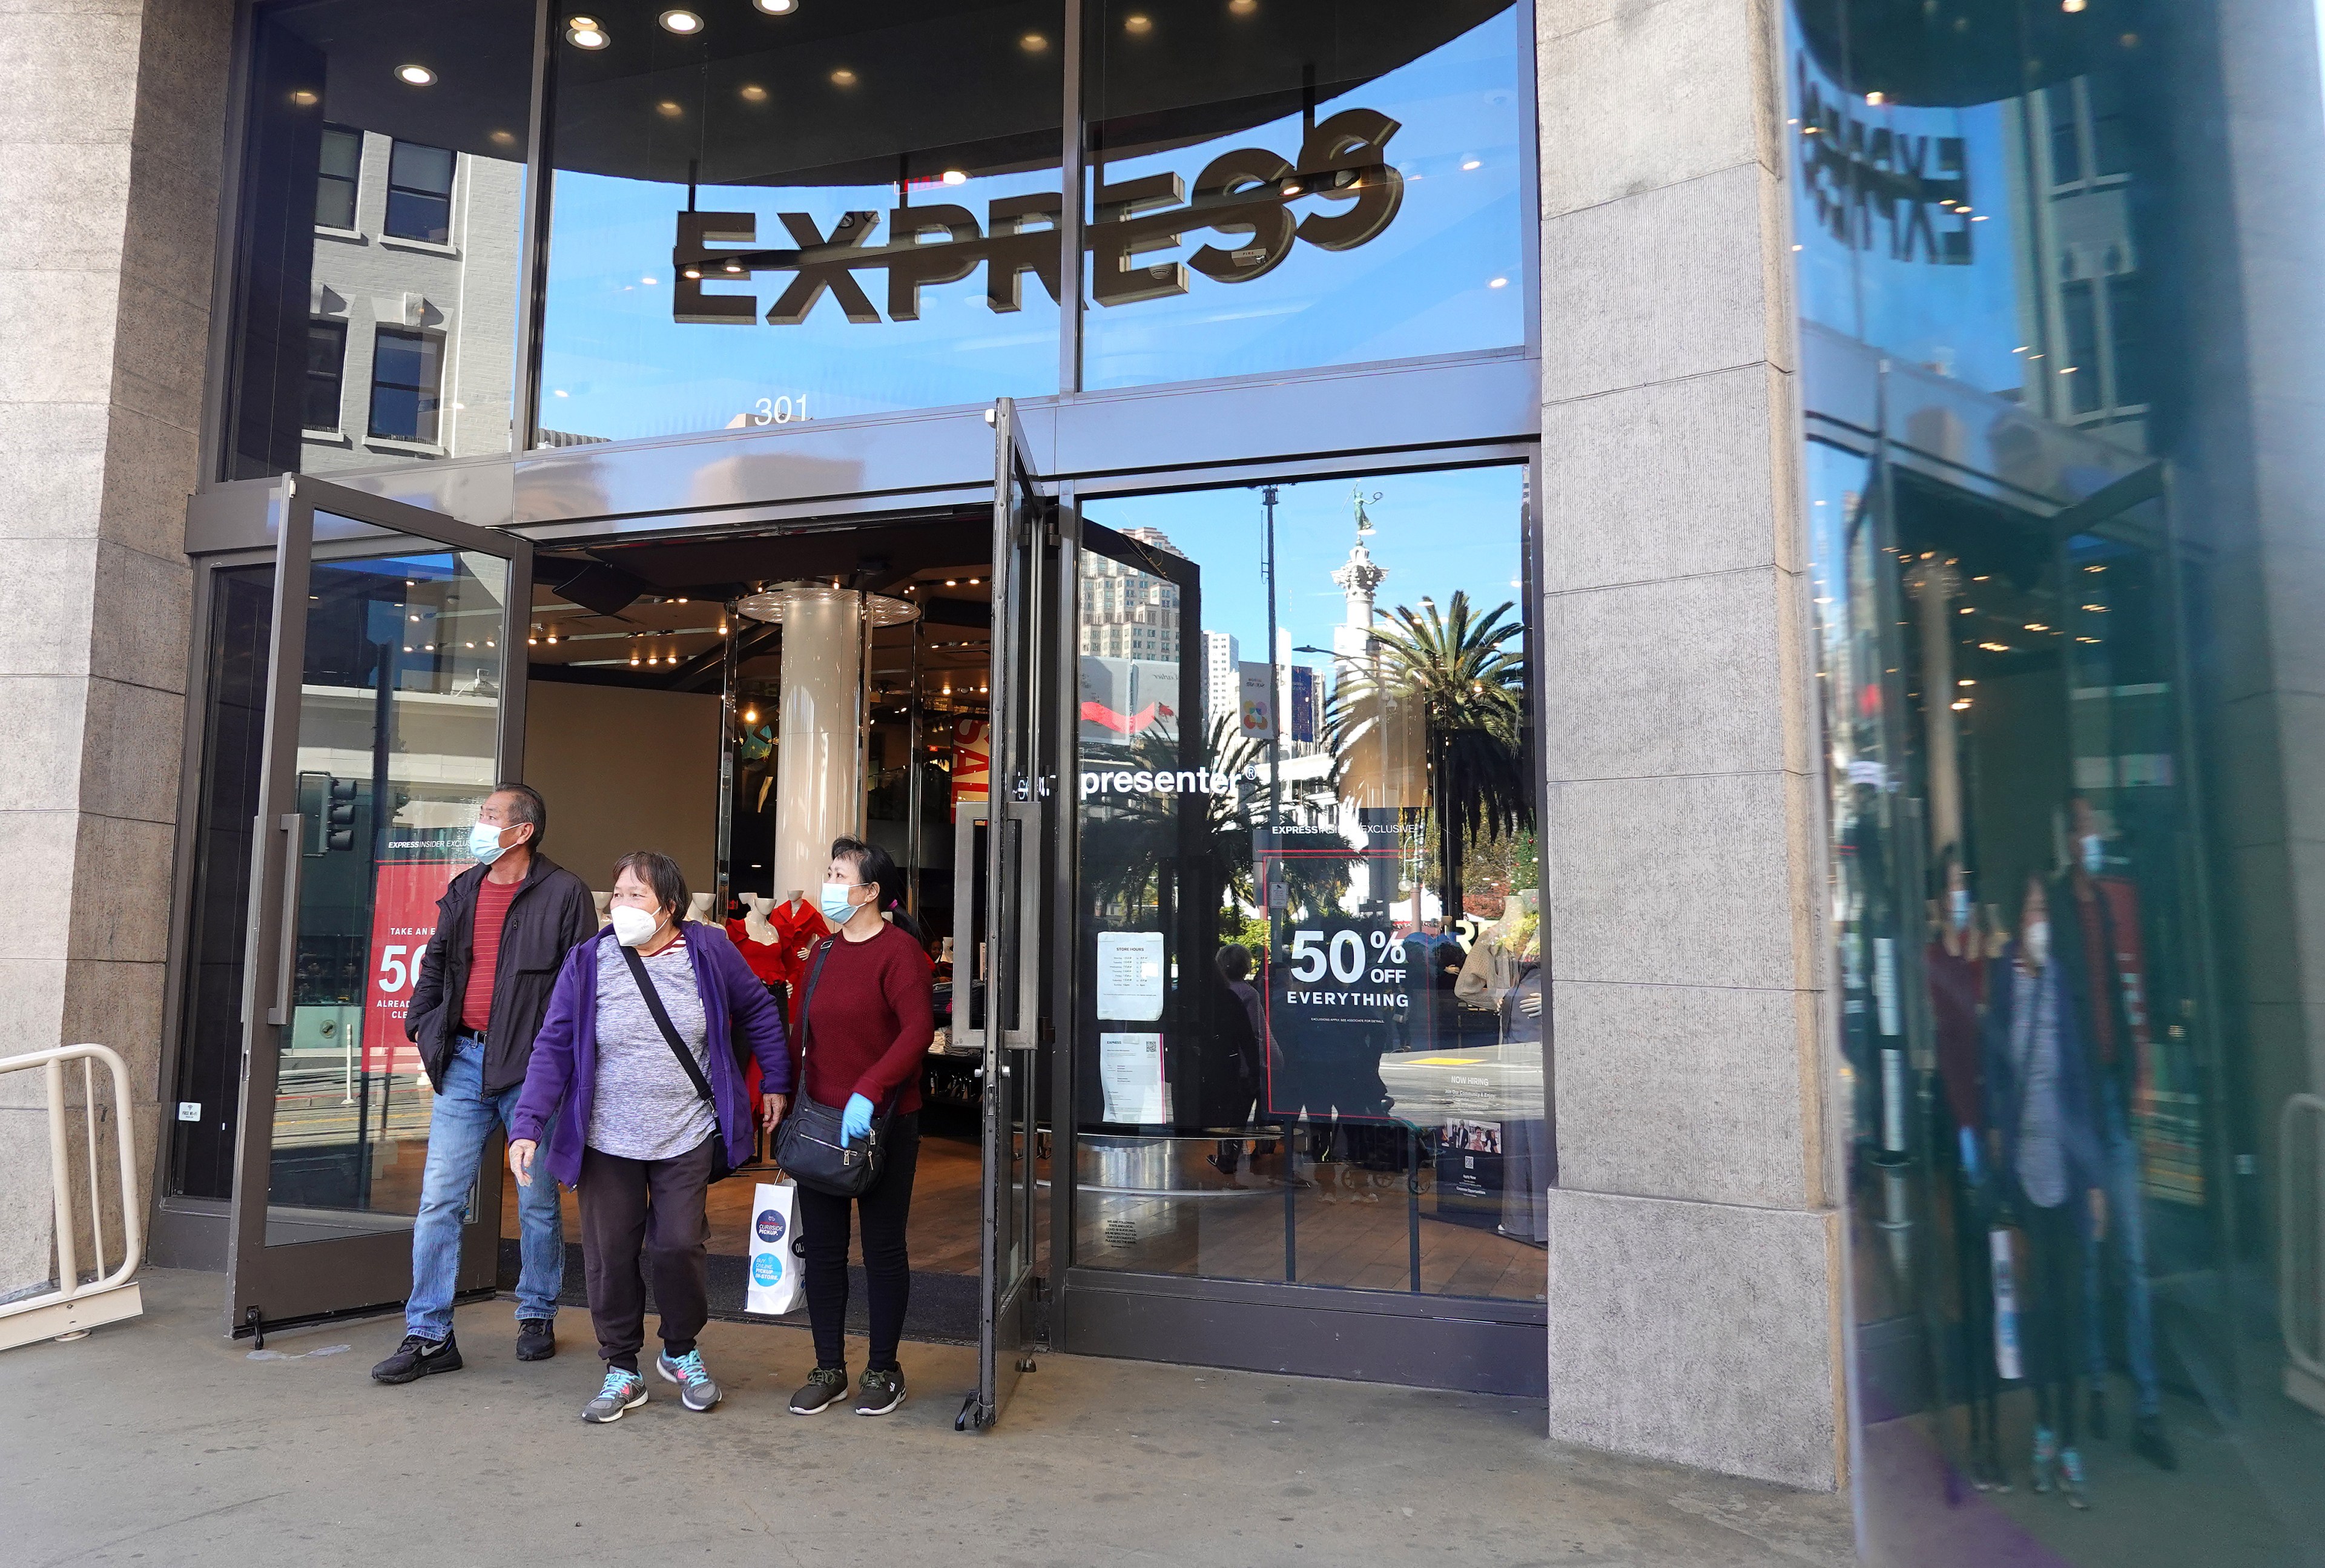 San Francisco Express Store Staffer Hit With Metal Pole During Robbery